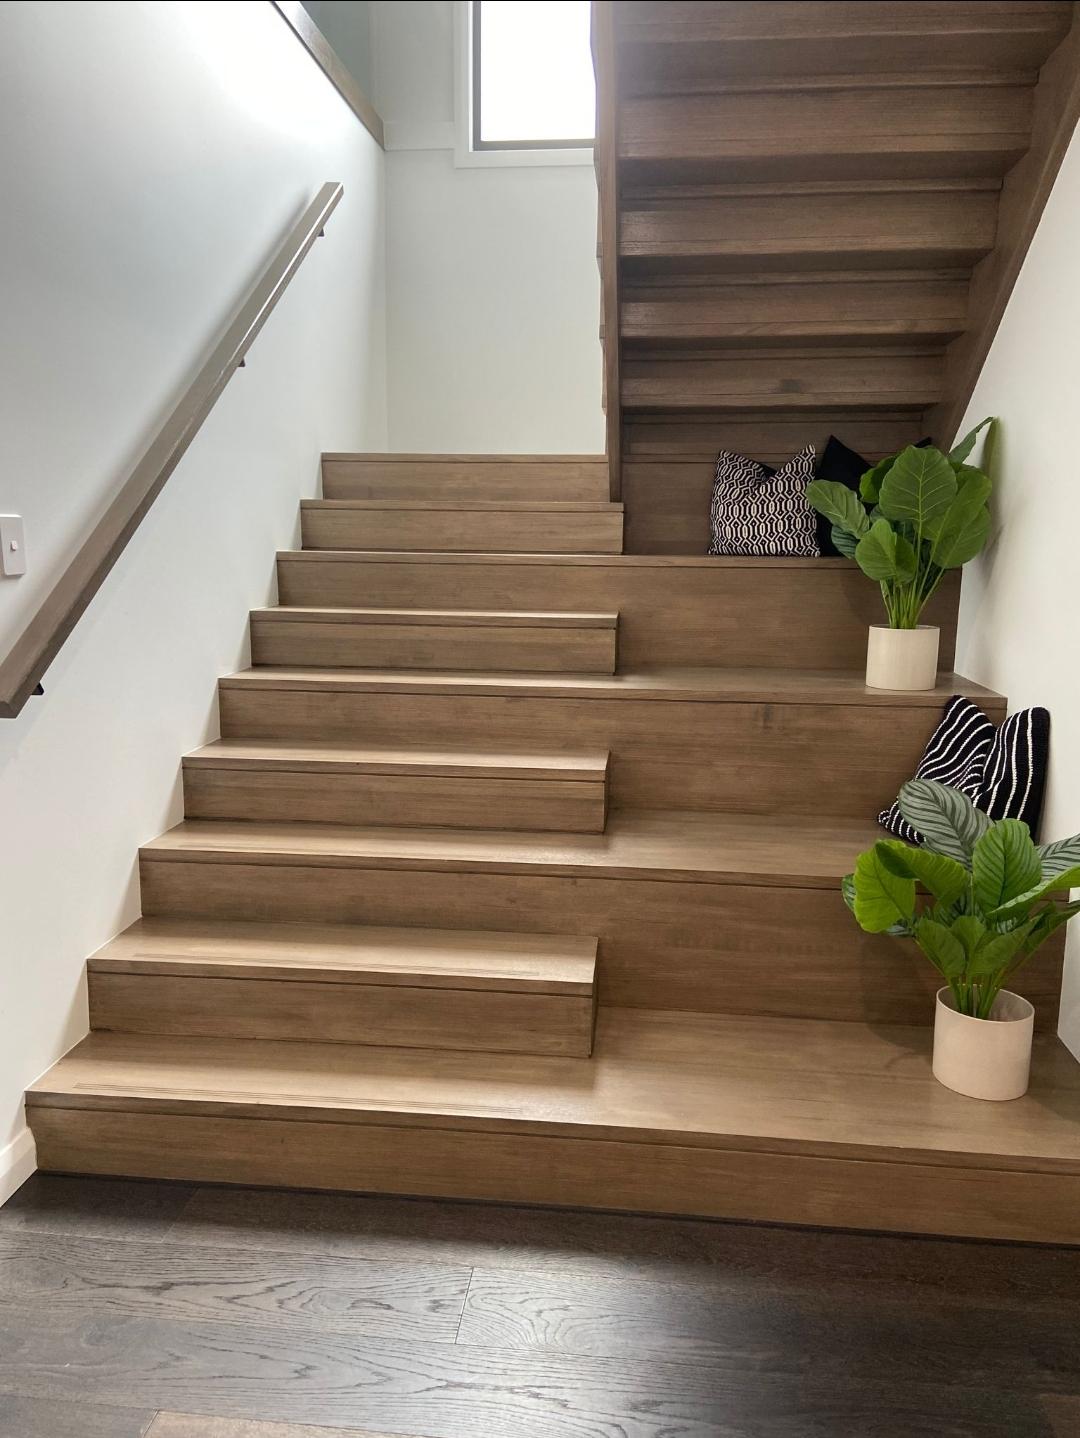 What is this kind of stairs called?